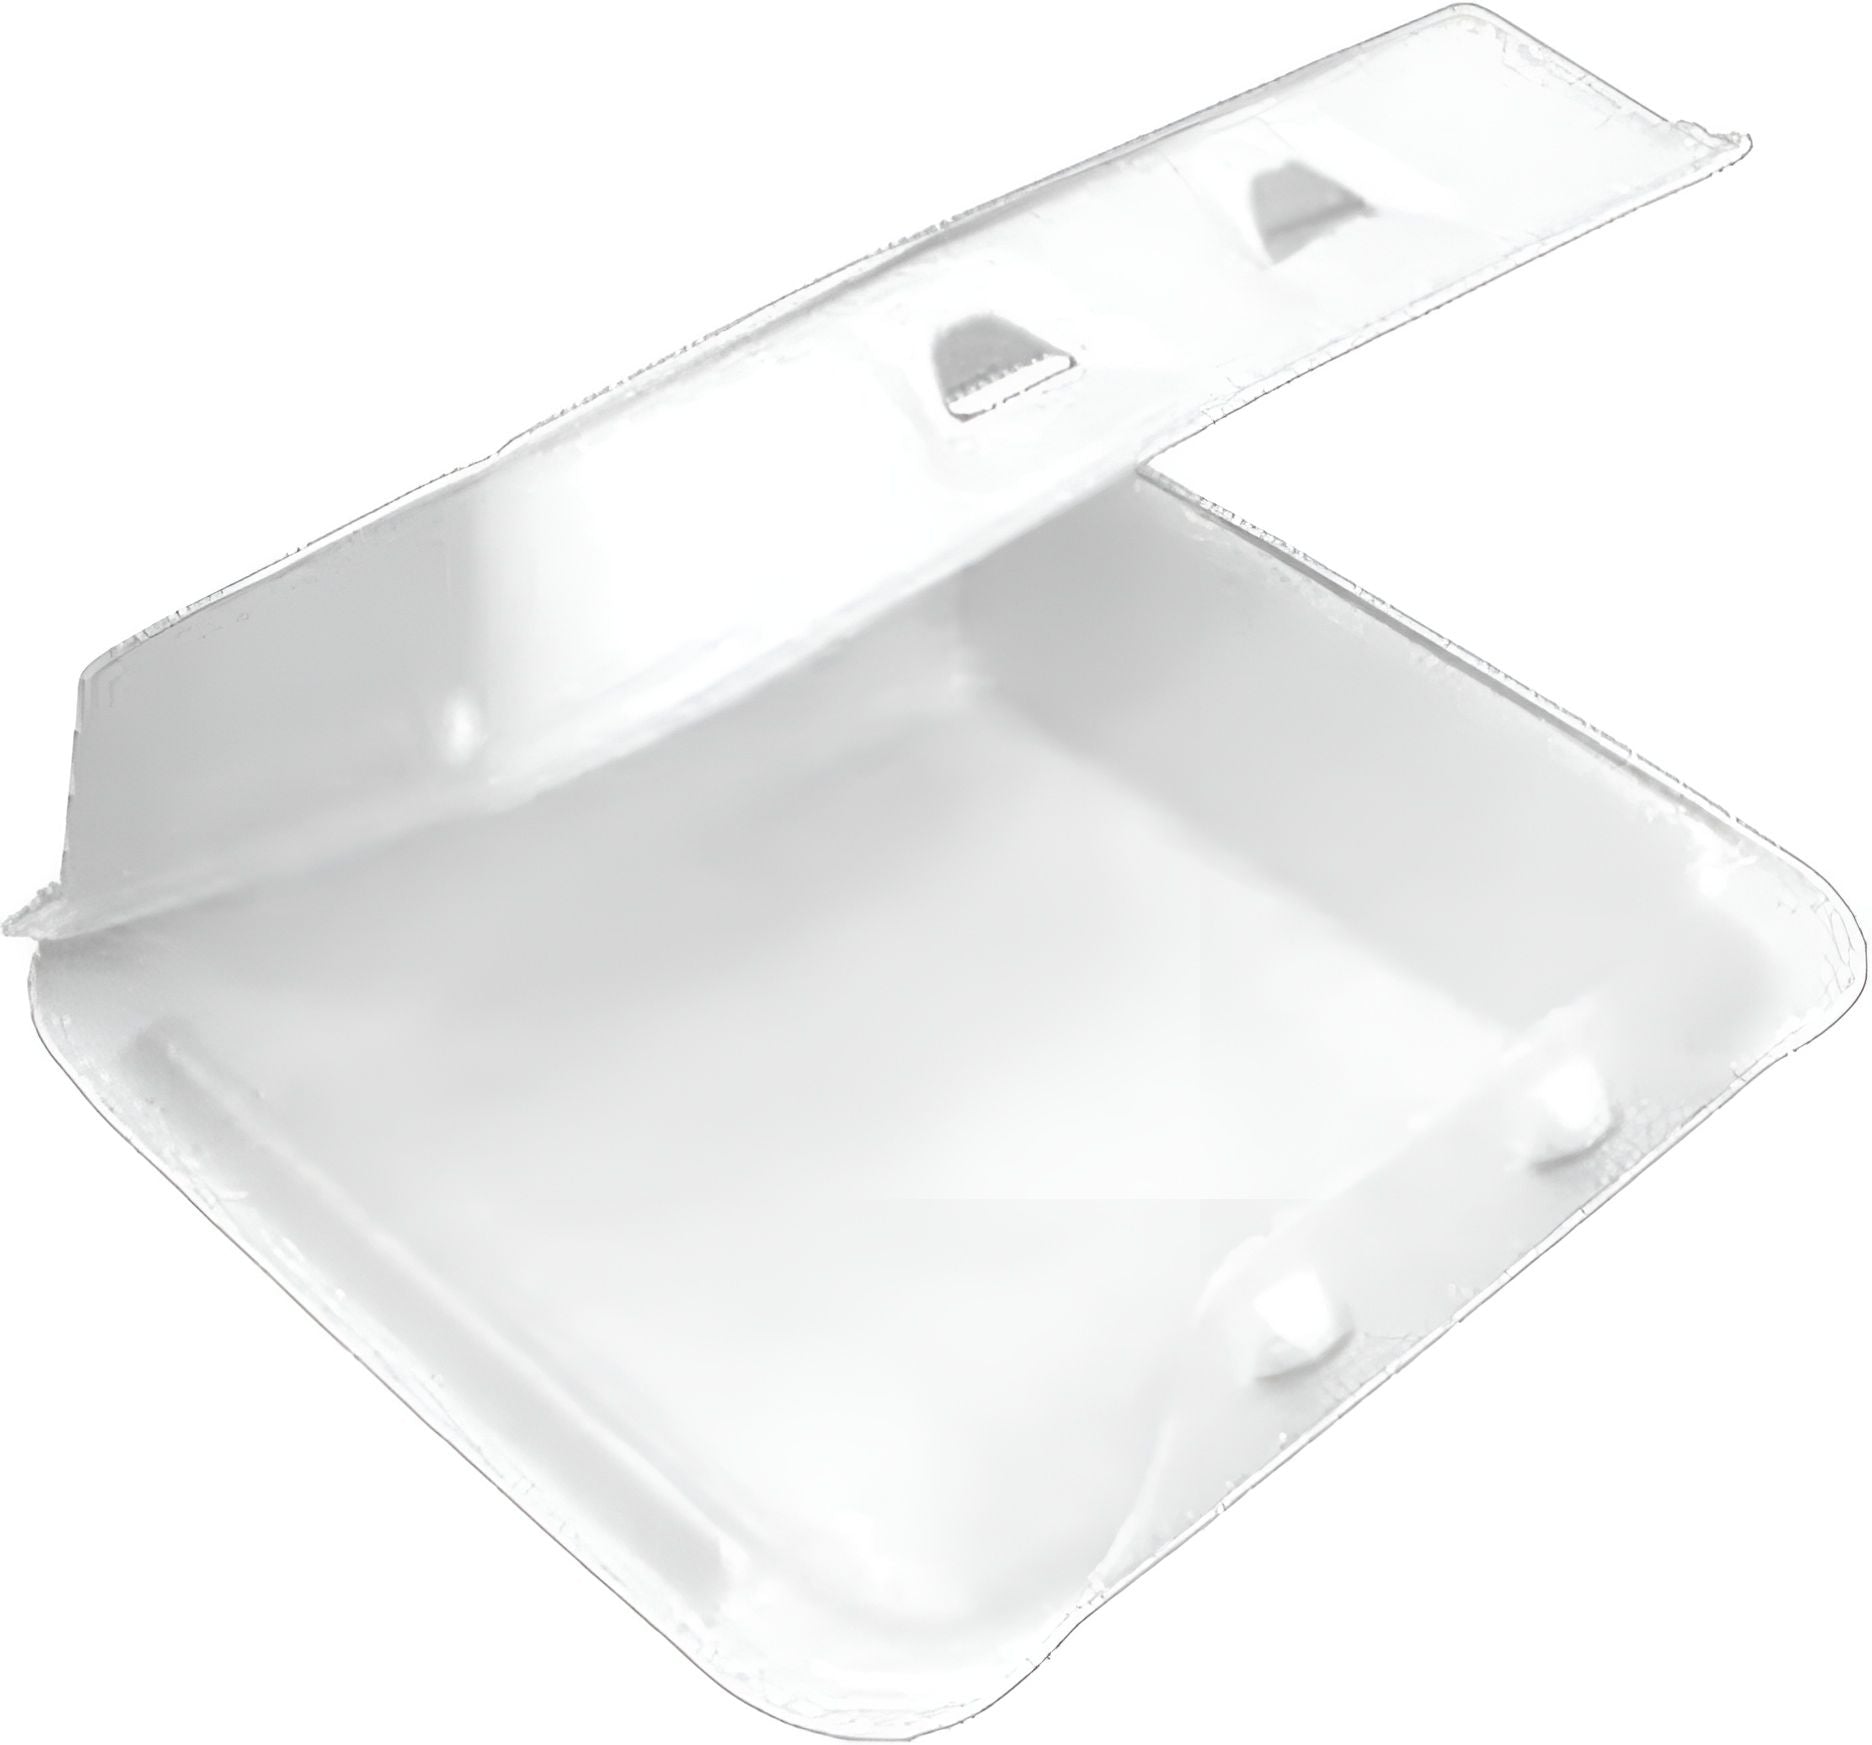 Pactiv Evergreen - 9" x 9.125" x 3.25", White Foam Large Hinged-Lid Takeout Container Smartlock, 150 Per Case - YHLW09010000